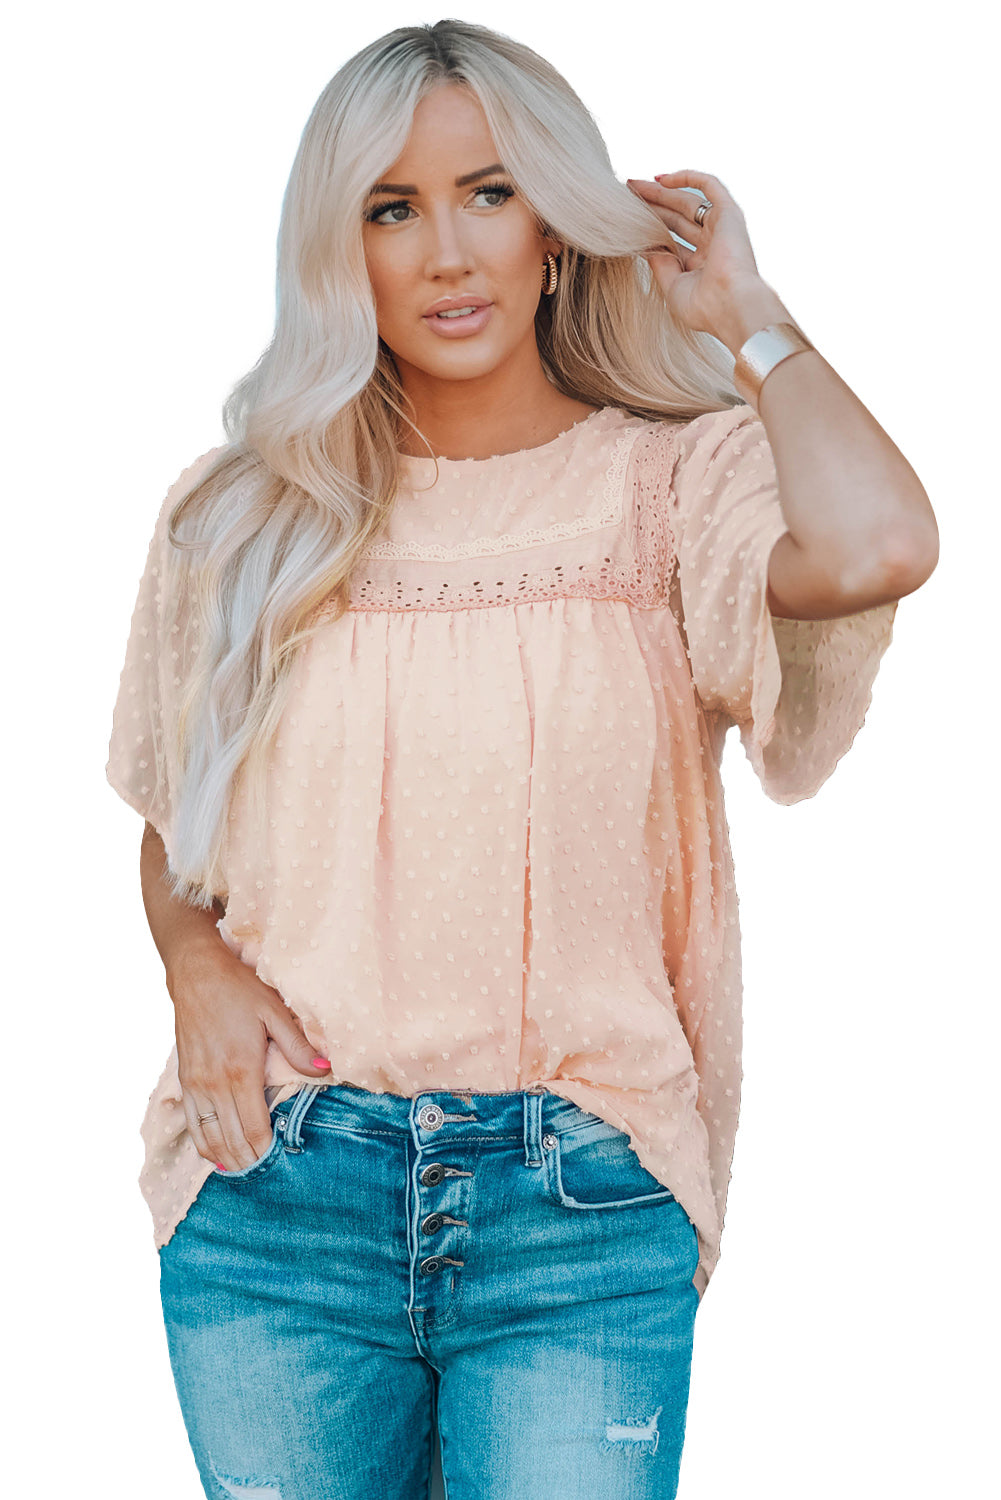 Apricot Flutter Sleeves Sheer Textured Babydoll Top Family T-shirts JT's Designer Fashion